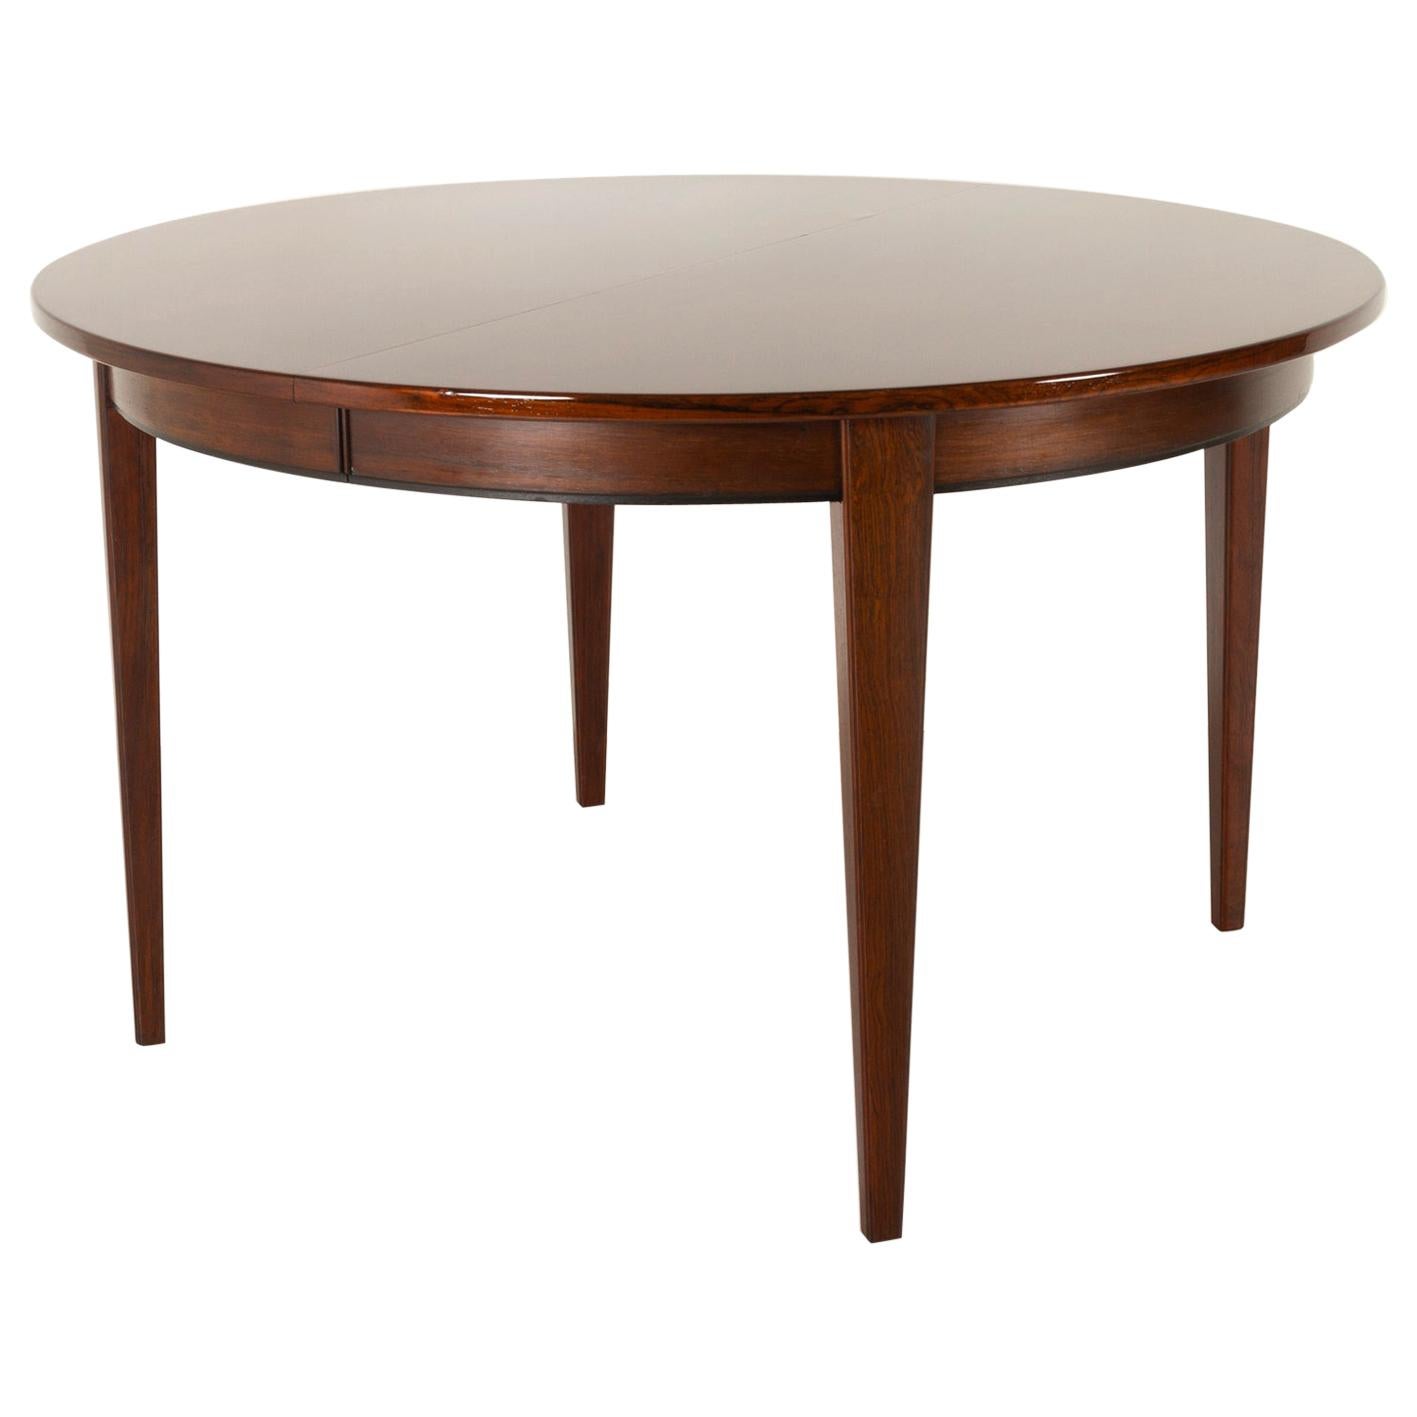 Vintage Danish Round Rosewood Dining Table Model 55 by Omann Jun, 1960s